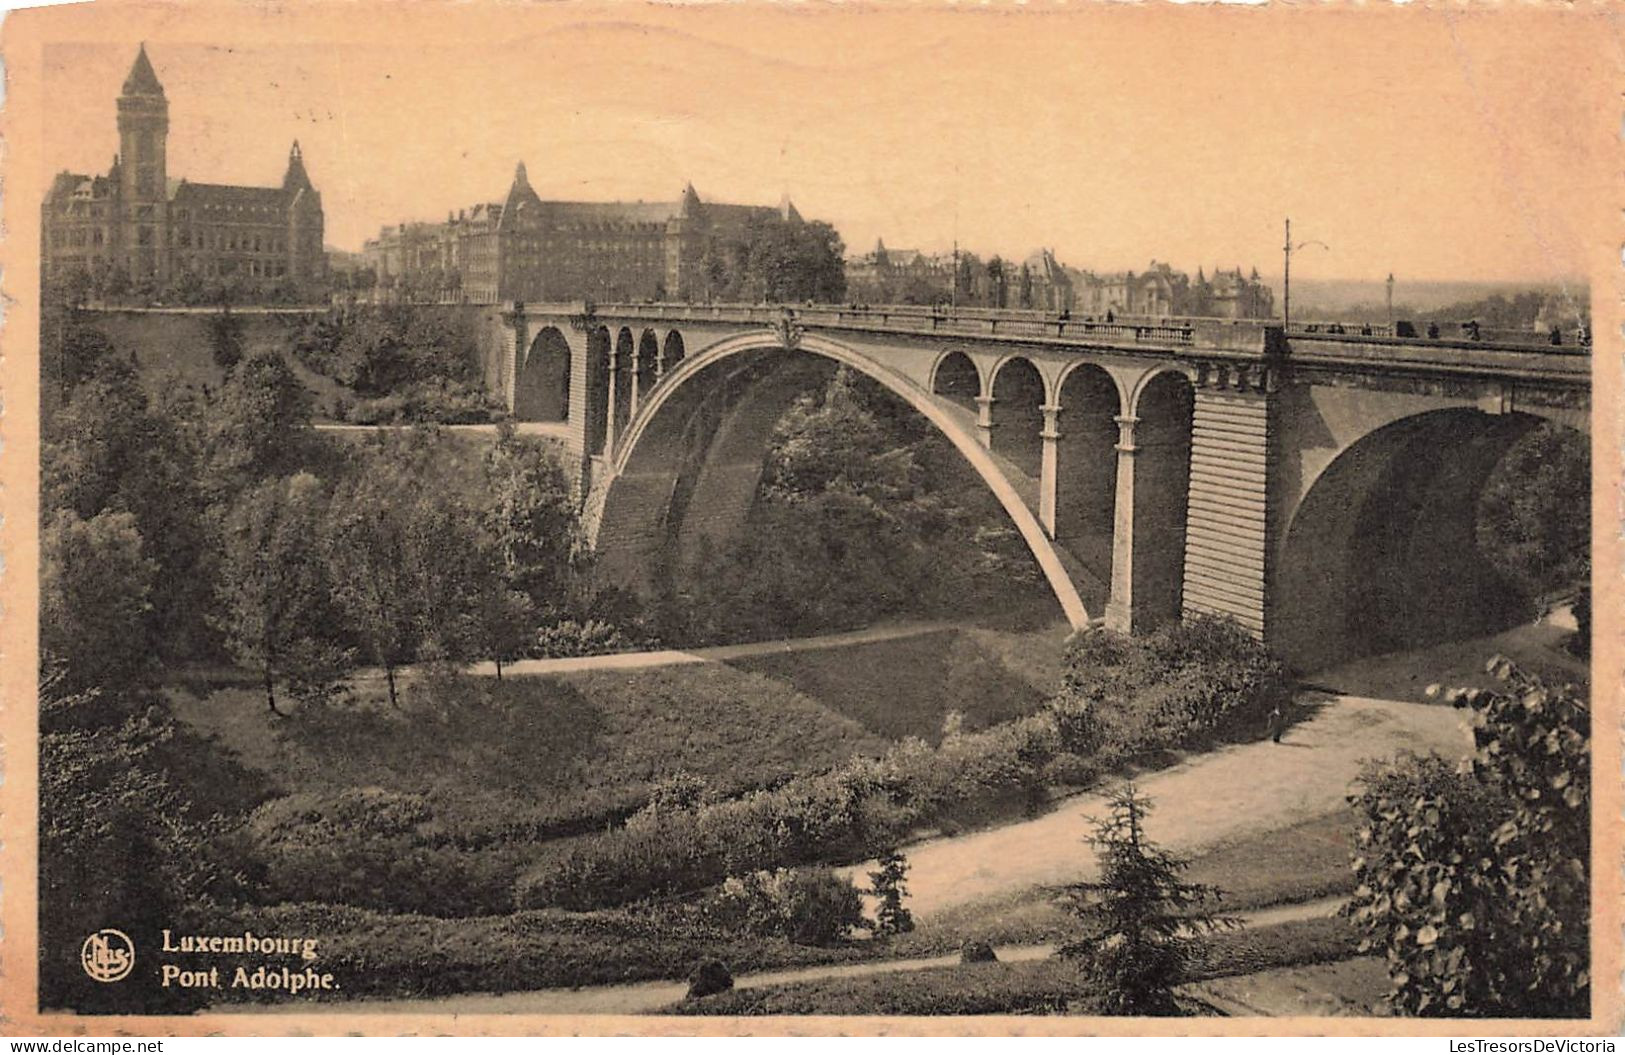 LUXEMBOURG - Luxembourg Ville - Pont Adolphe - Carte Postale Ancienne - Luxembourg - Ville